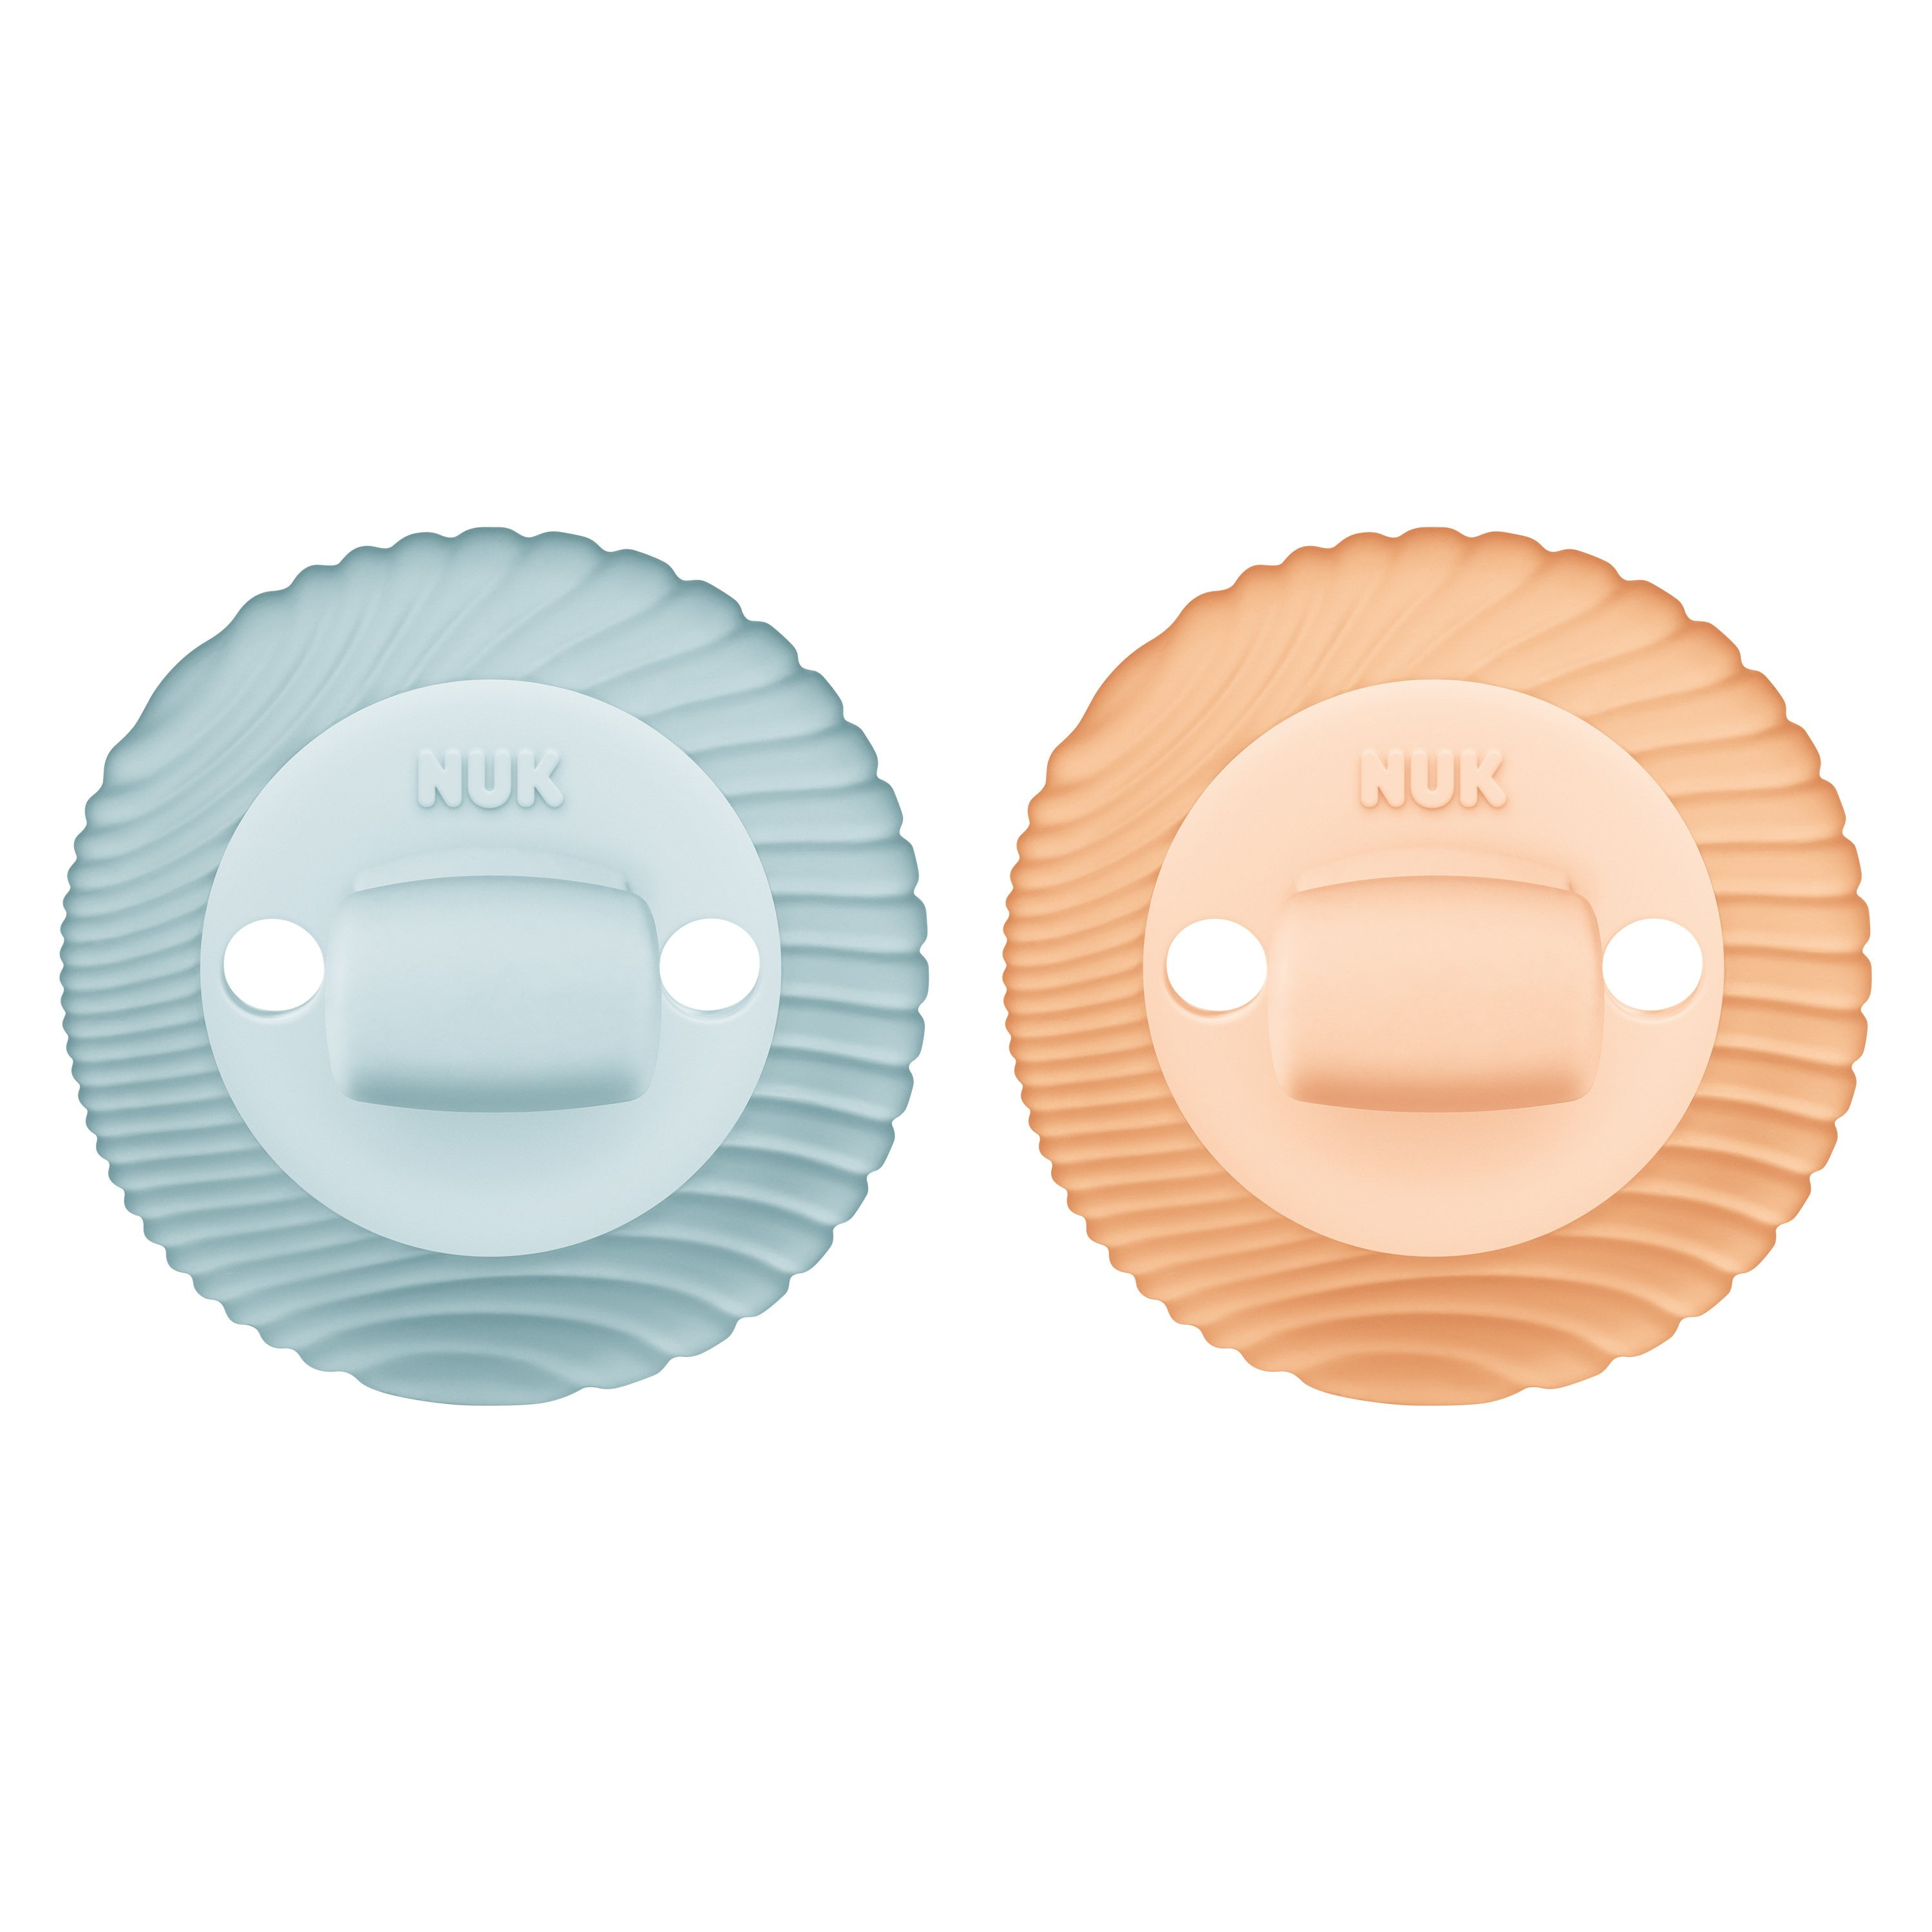 MAM Perfect 2-6 Months BOY- Pacifiers Double pack - Alpenbee, 9,99 €